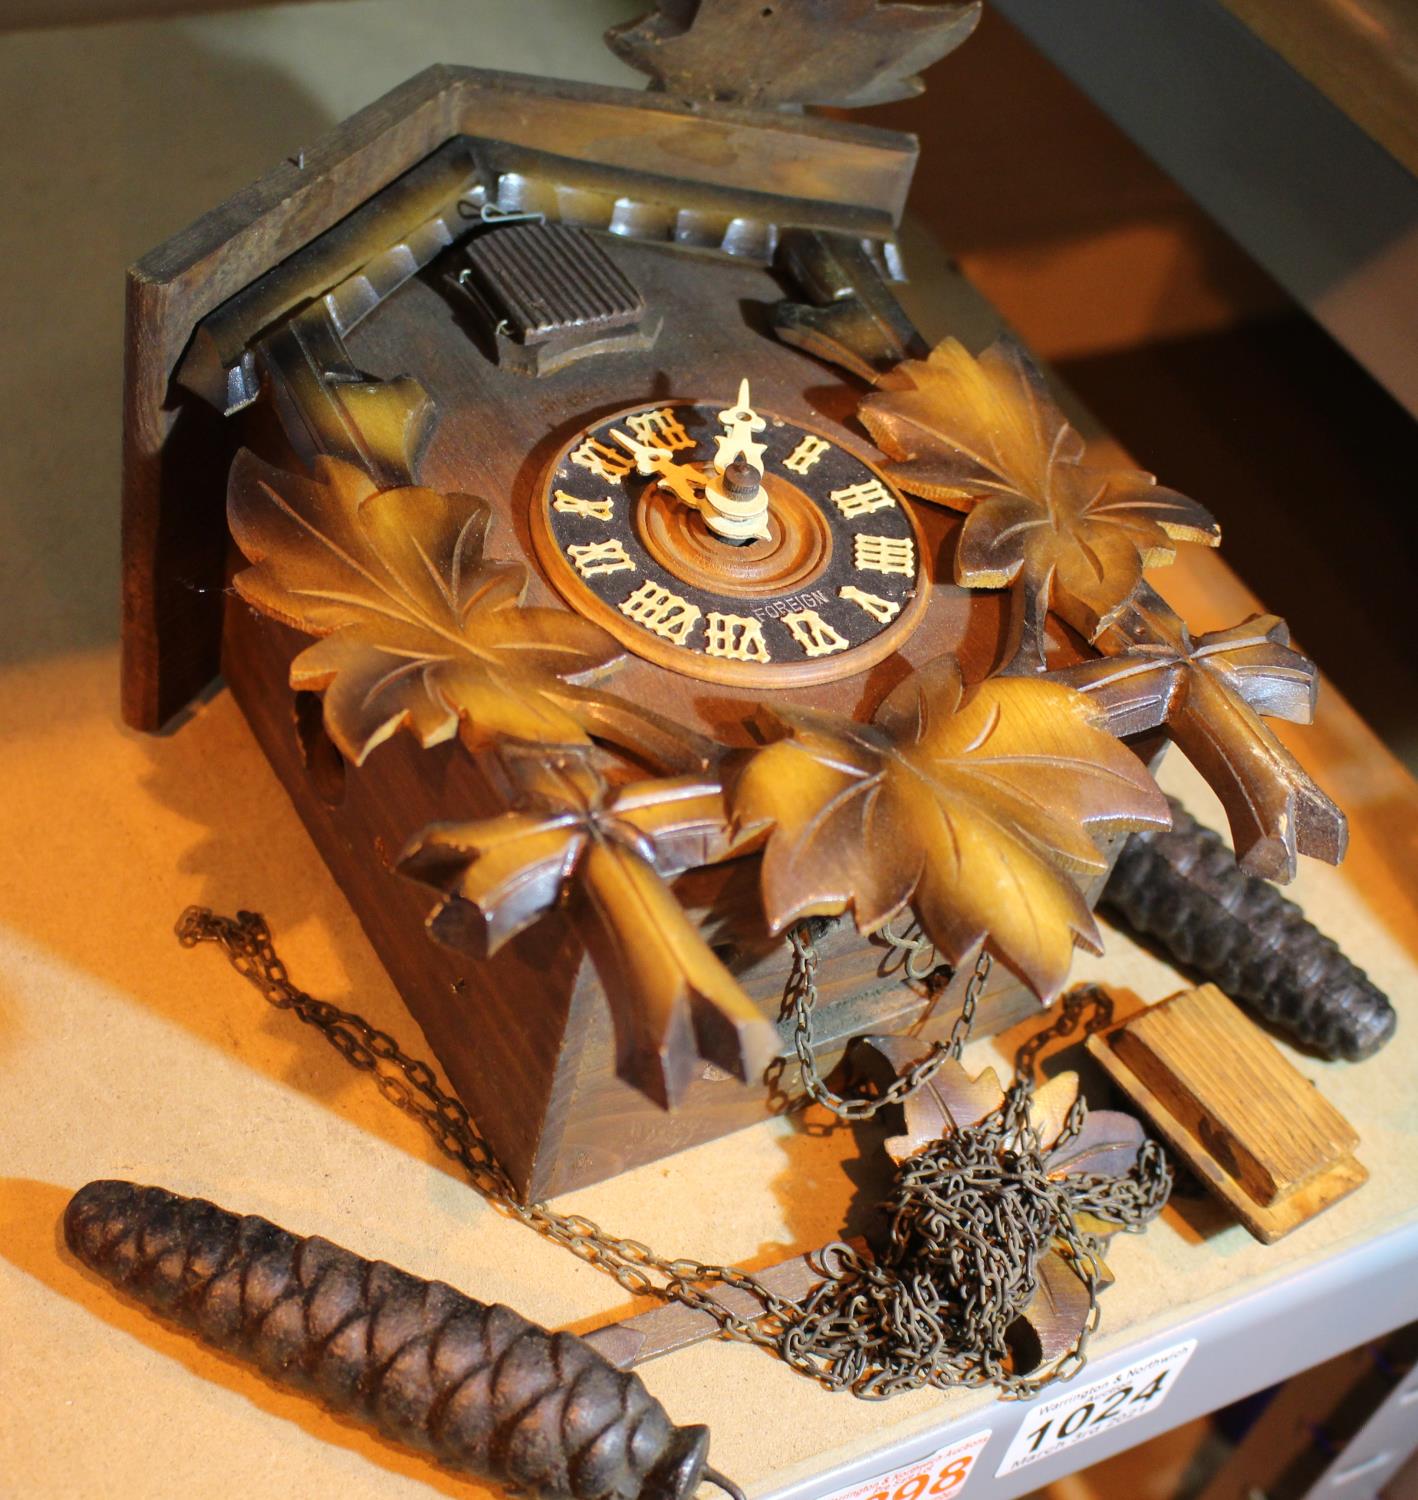 Unnamed black forest type cuckoo clock. Not available for in-house P&P, contact Paul O'Hea at